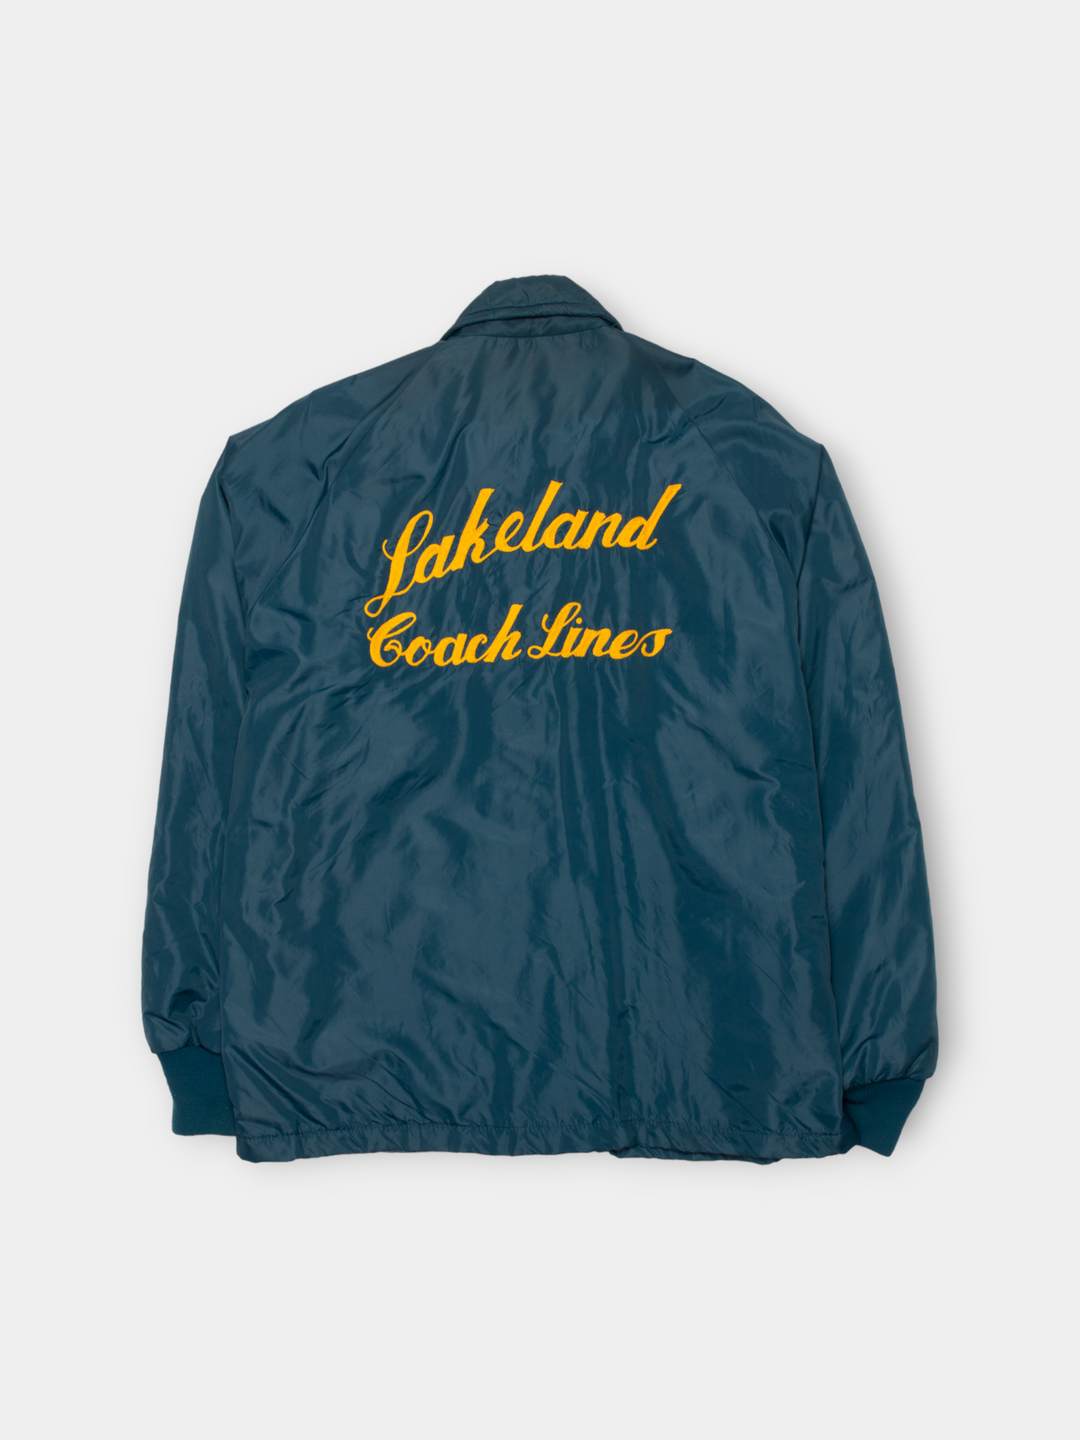 70s No Ones Called Chuck Anymore Coach Jacket (L)